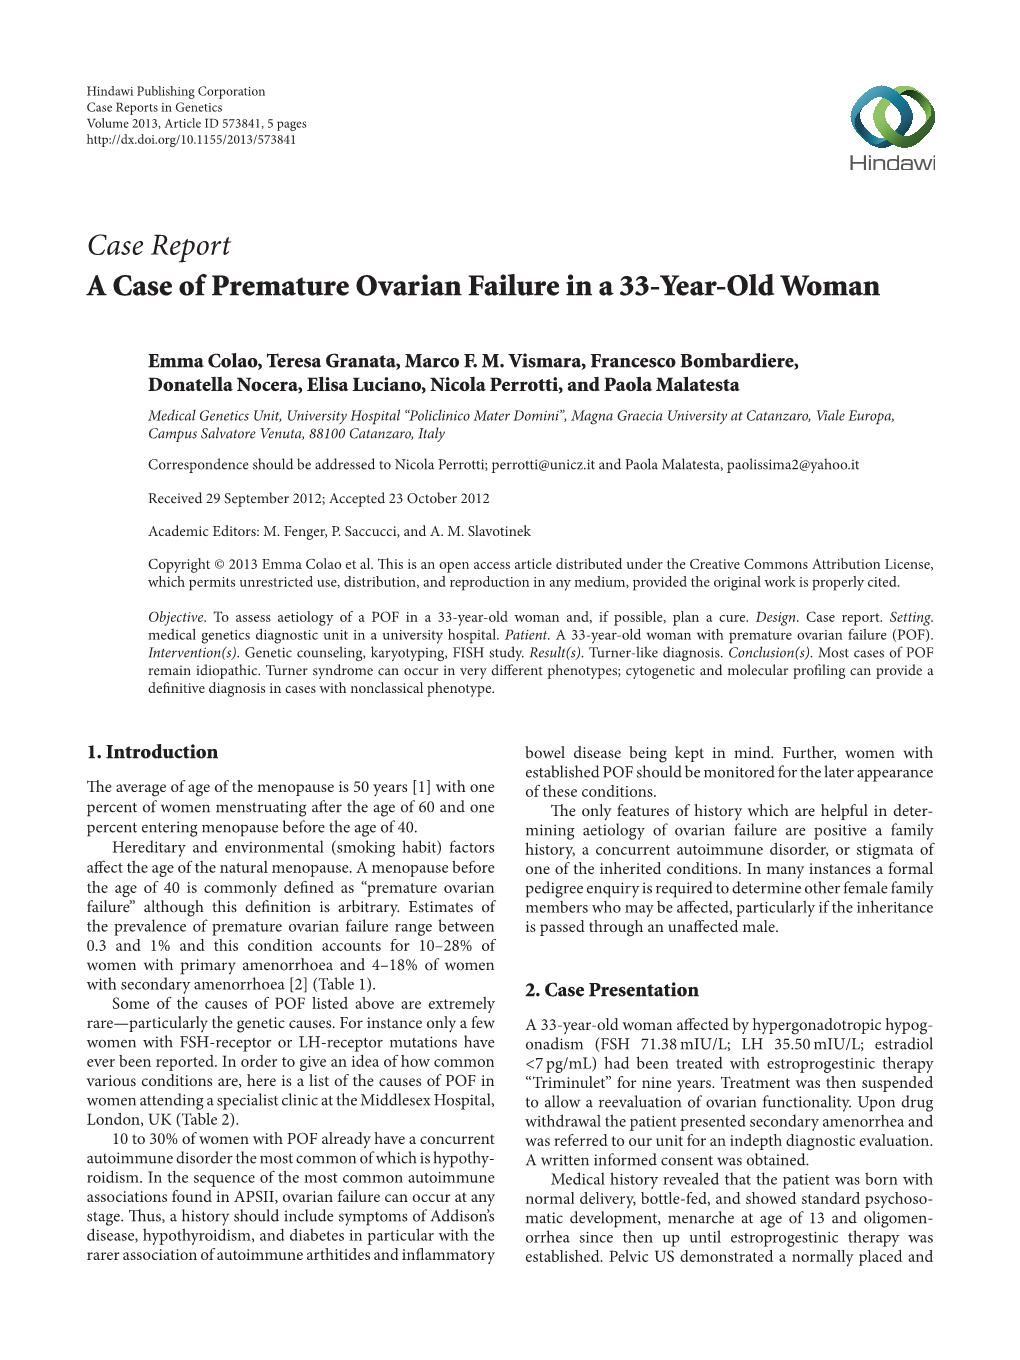 A Case of Premature Ovarian Failure in a 33-Year-Old Woman